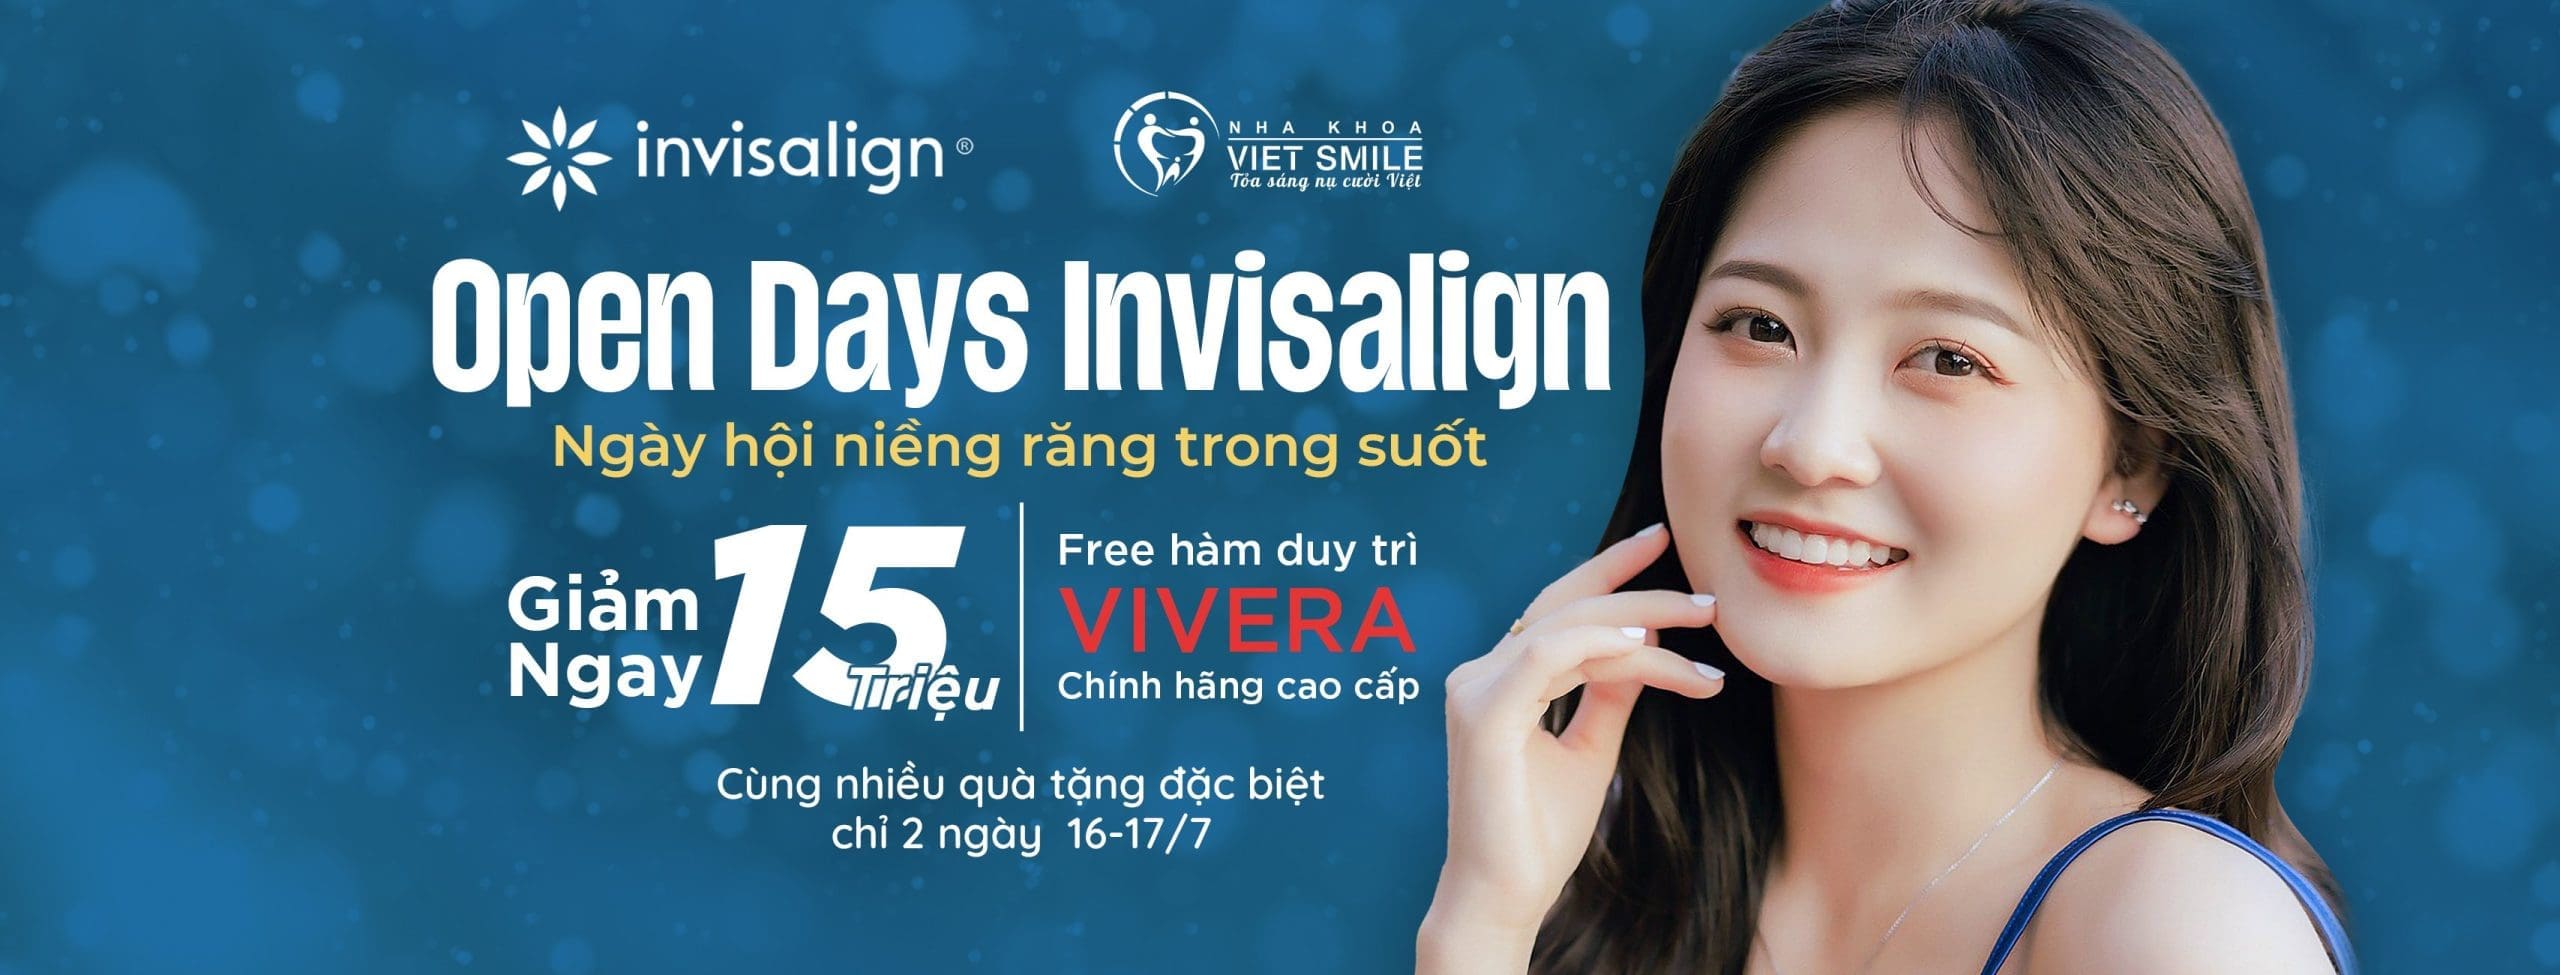 Open days invisalign scaled